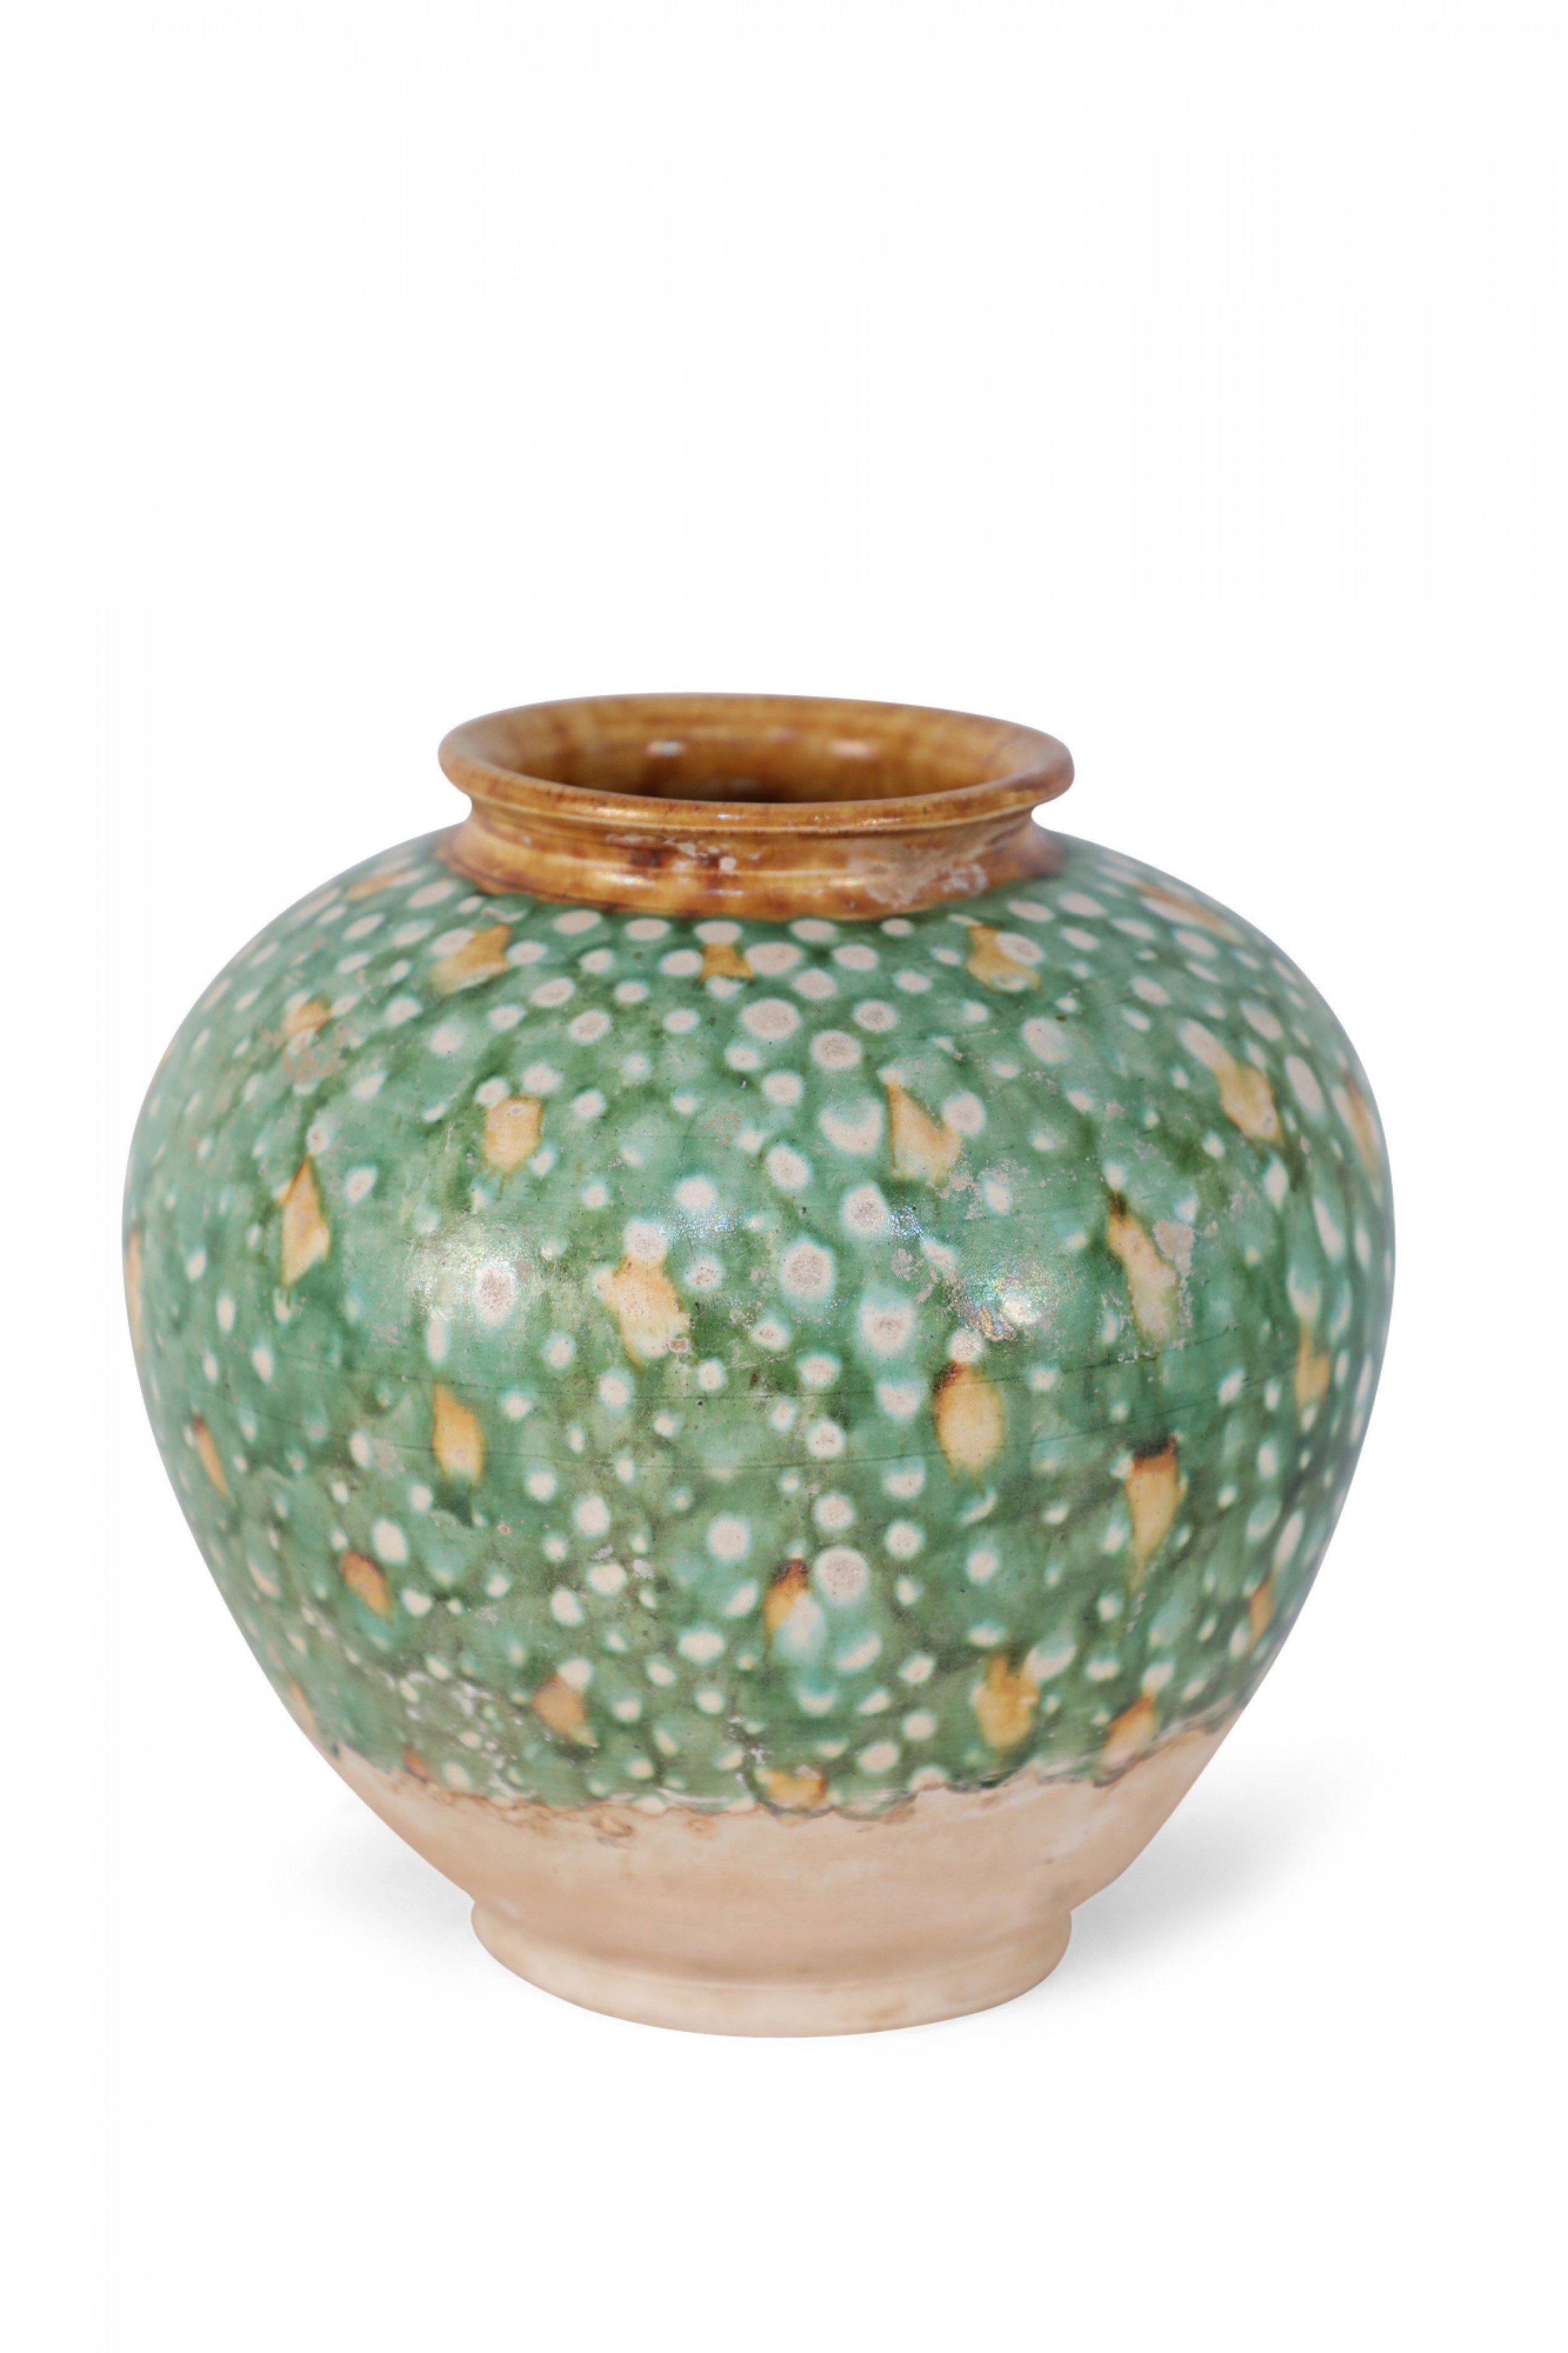 Antique Chinese Tang Dynasty-style vase crafted with the traditional tri-color glaze, or Sancai, utilizing brown, green and off-white, and with a glazed ochre-color opening.